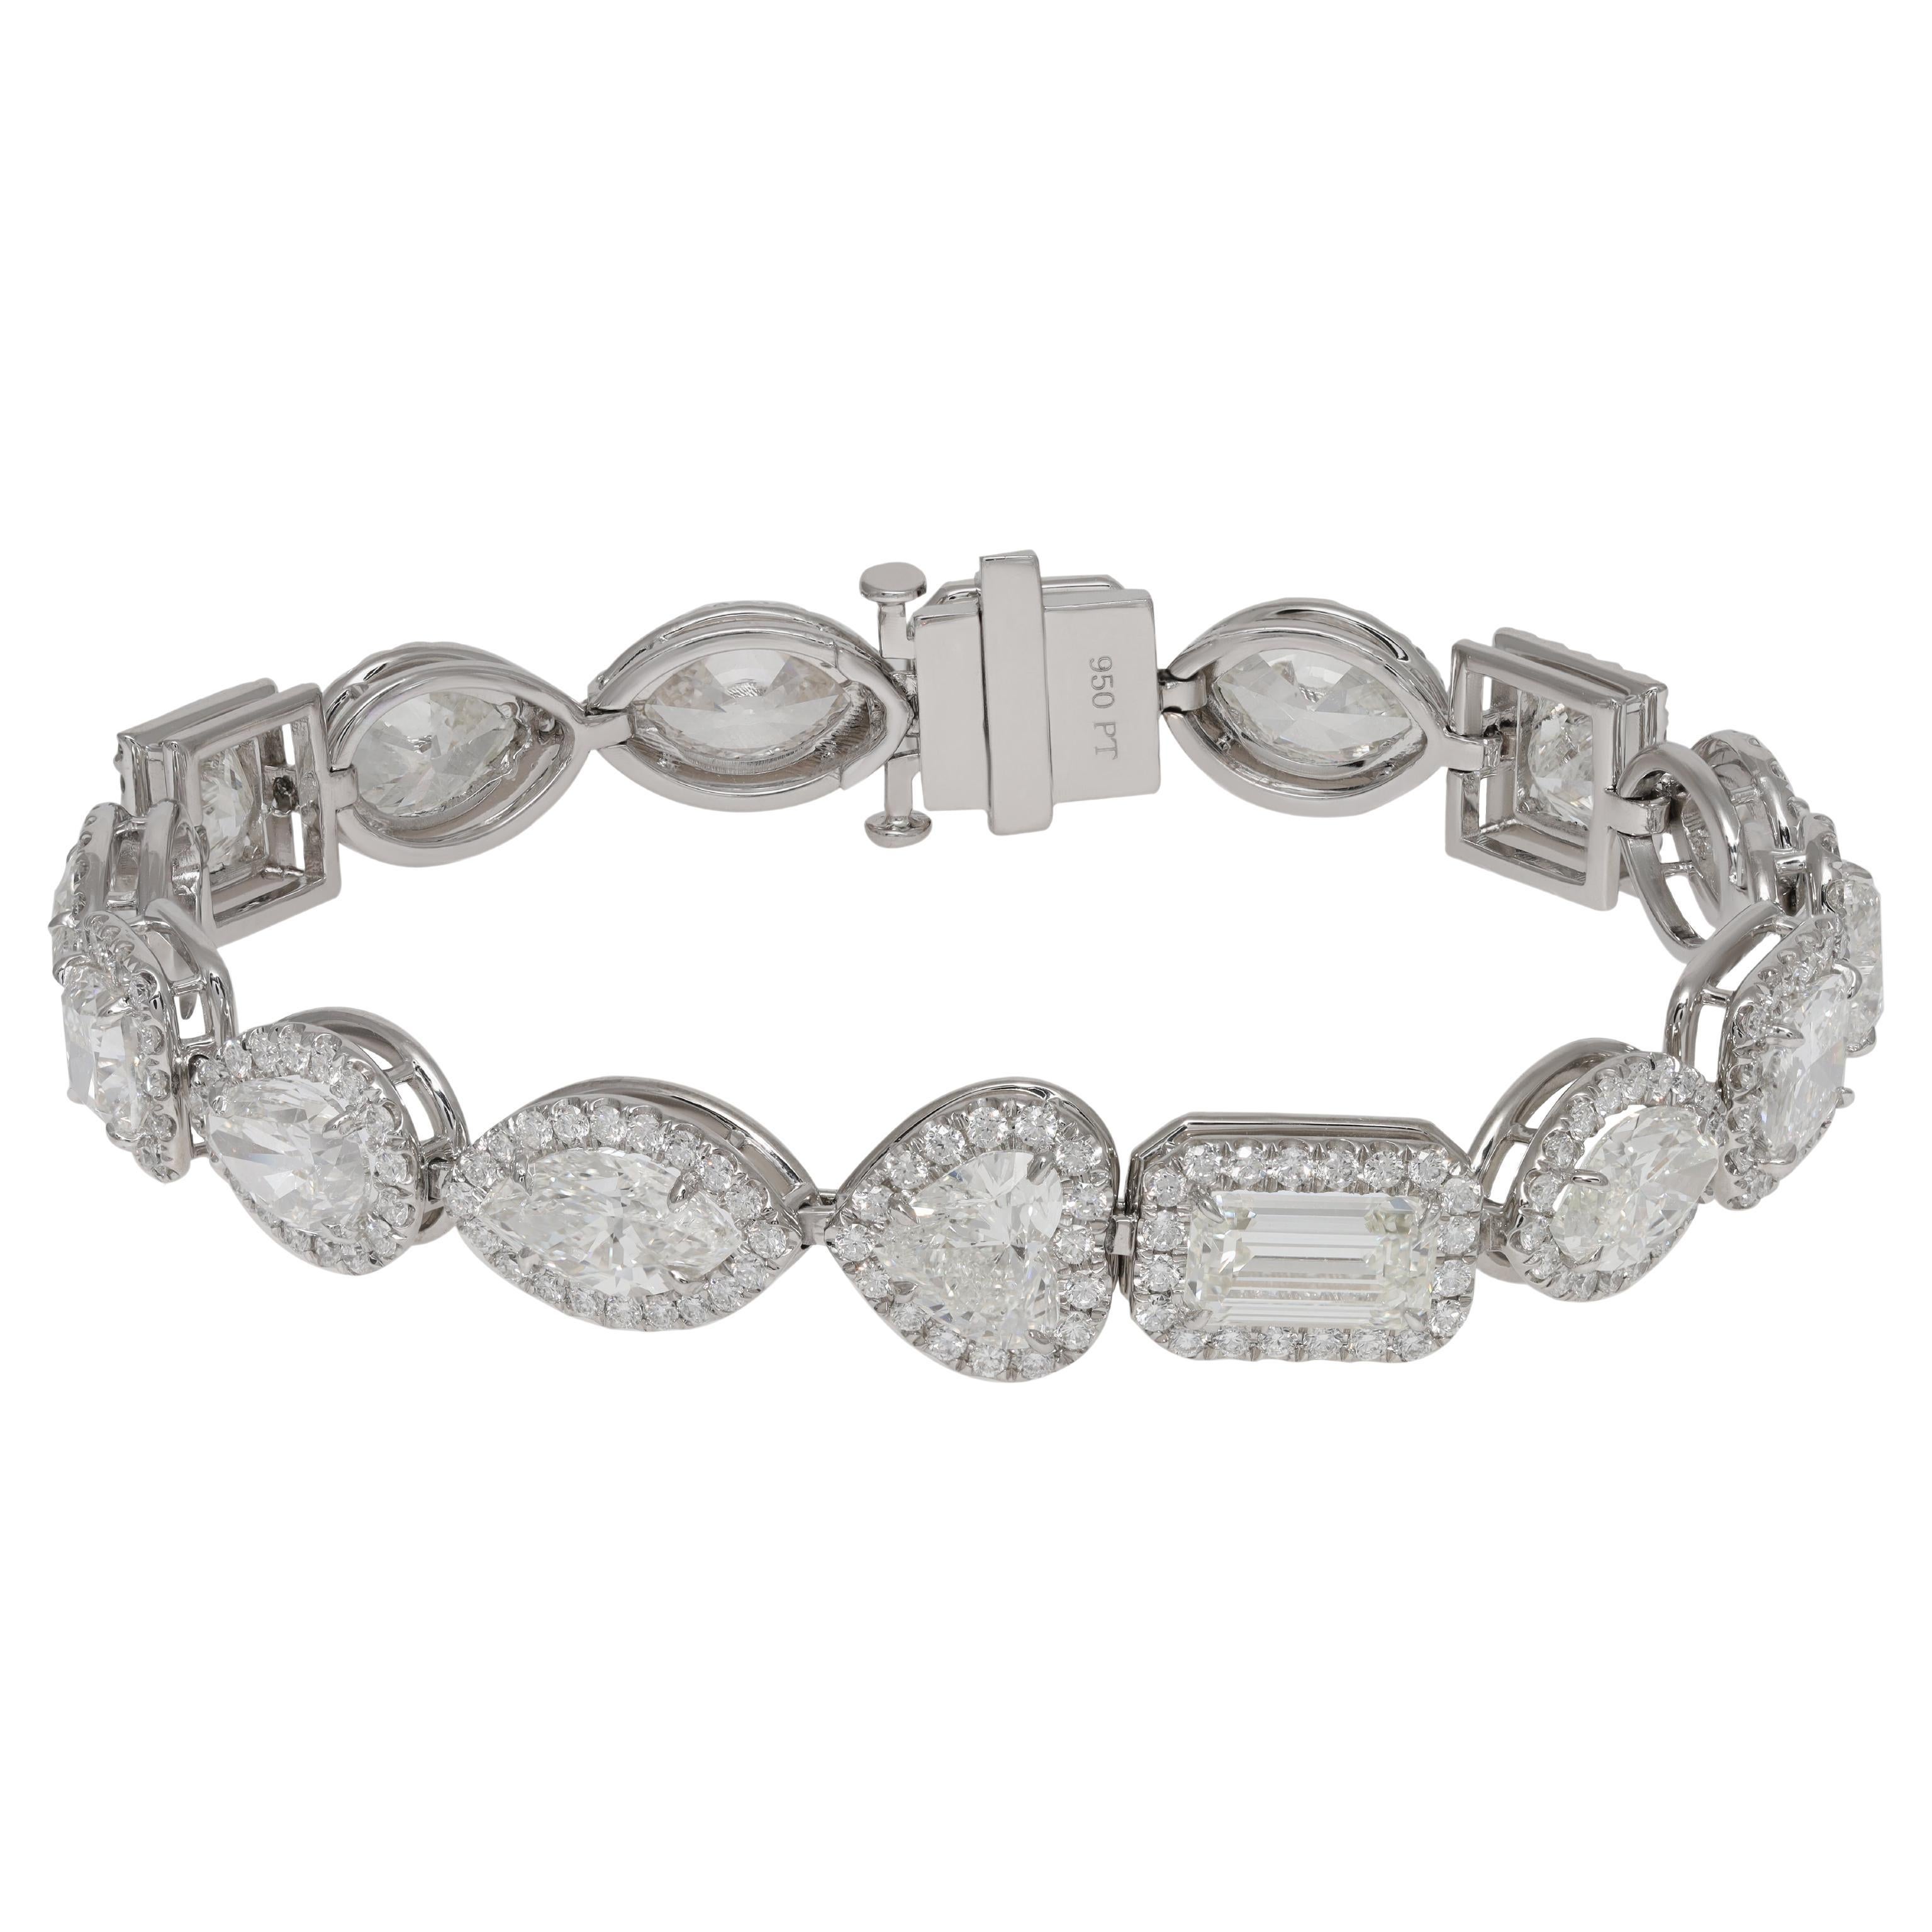 Diana M. Platinum diamond bracelet featuring 16.44 cts of multi-shaped GIA stons For Sale